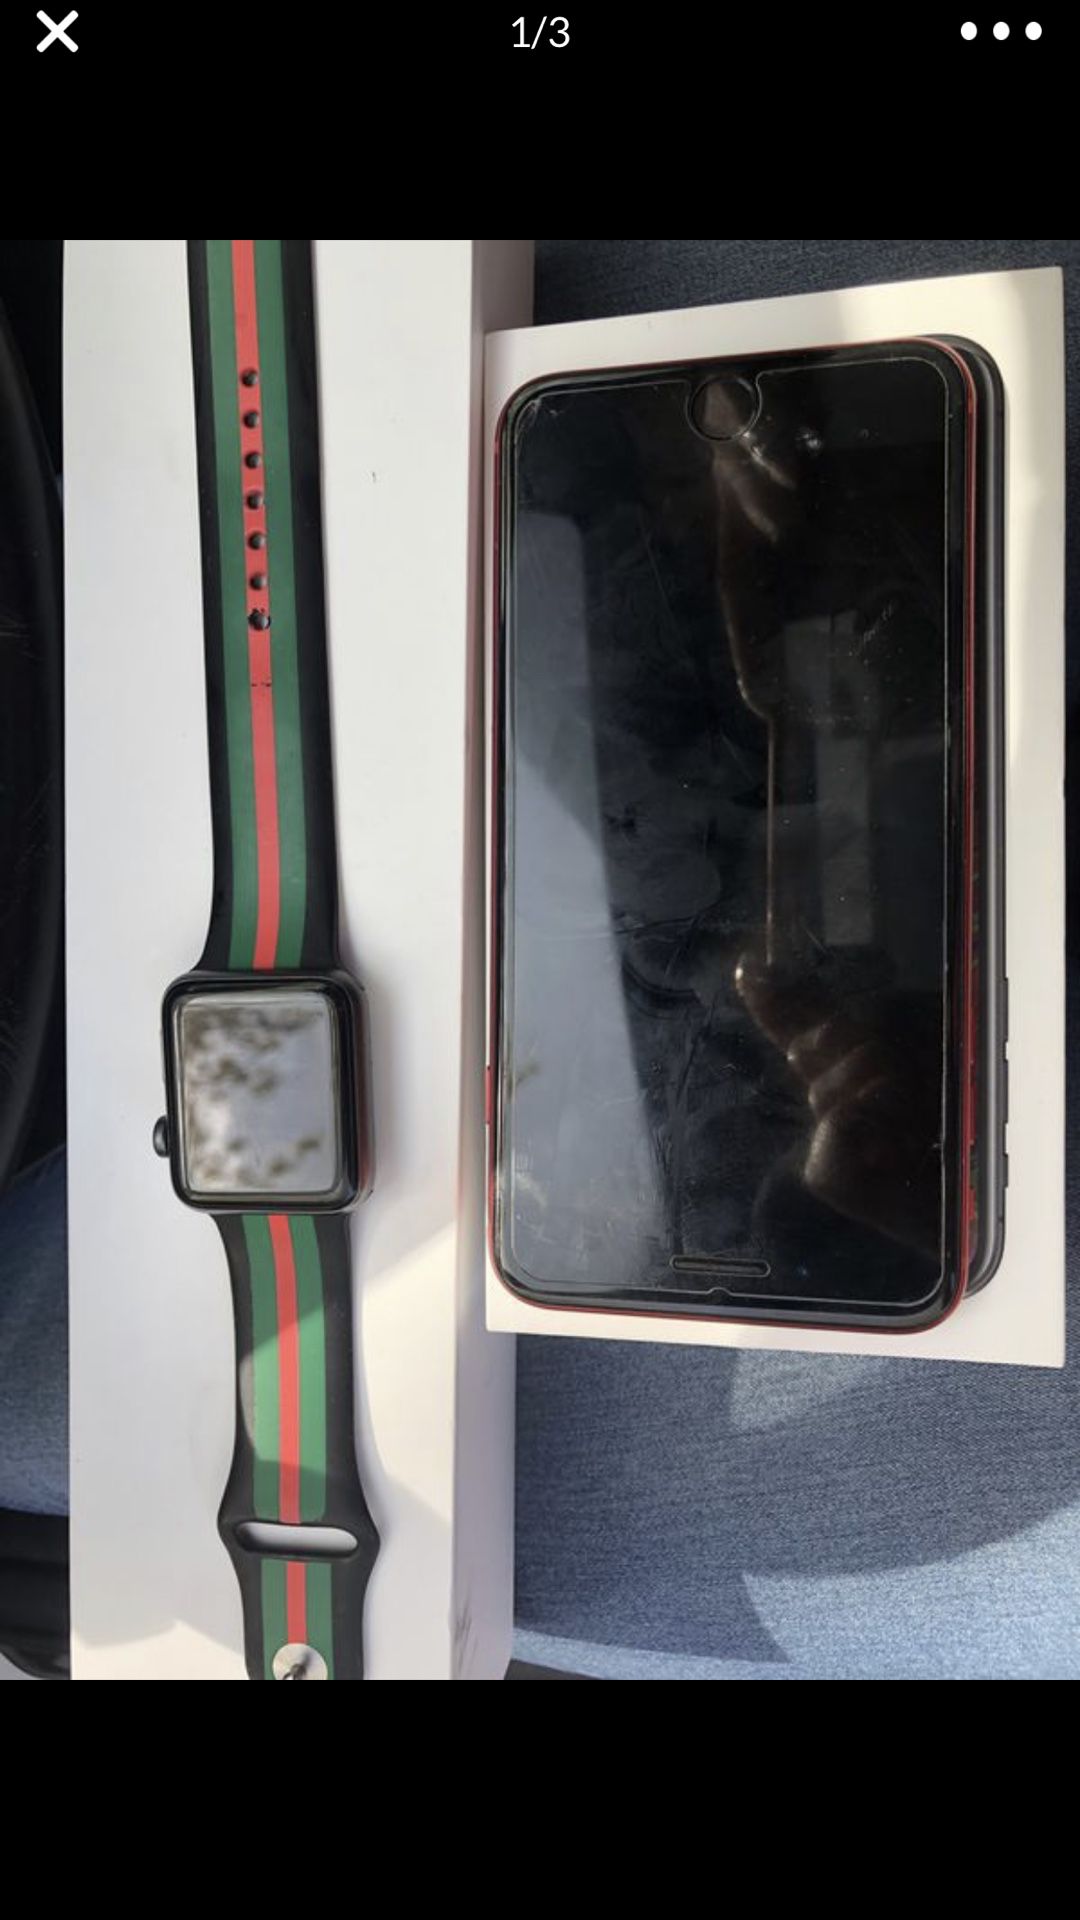 Apple Watch or Apple Phone sold separately in excellent condition